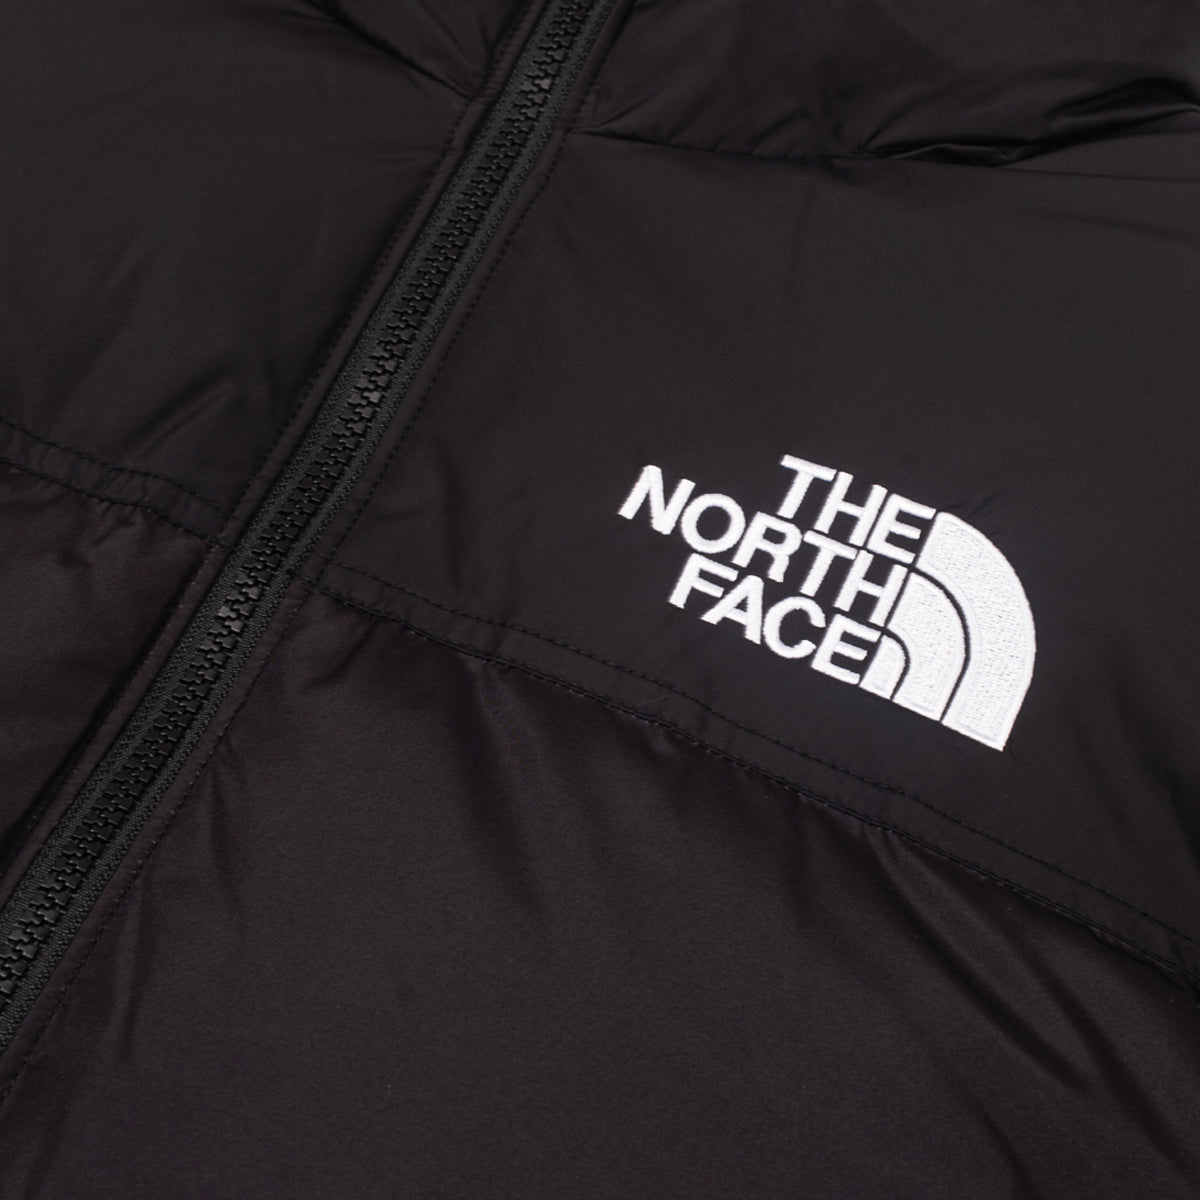 The North Face Nuptse Dip Dye Jacket-SUEDE Store